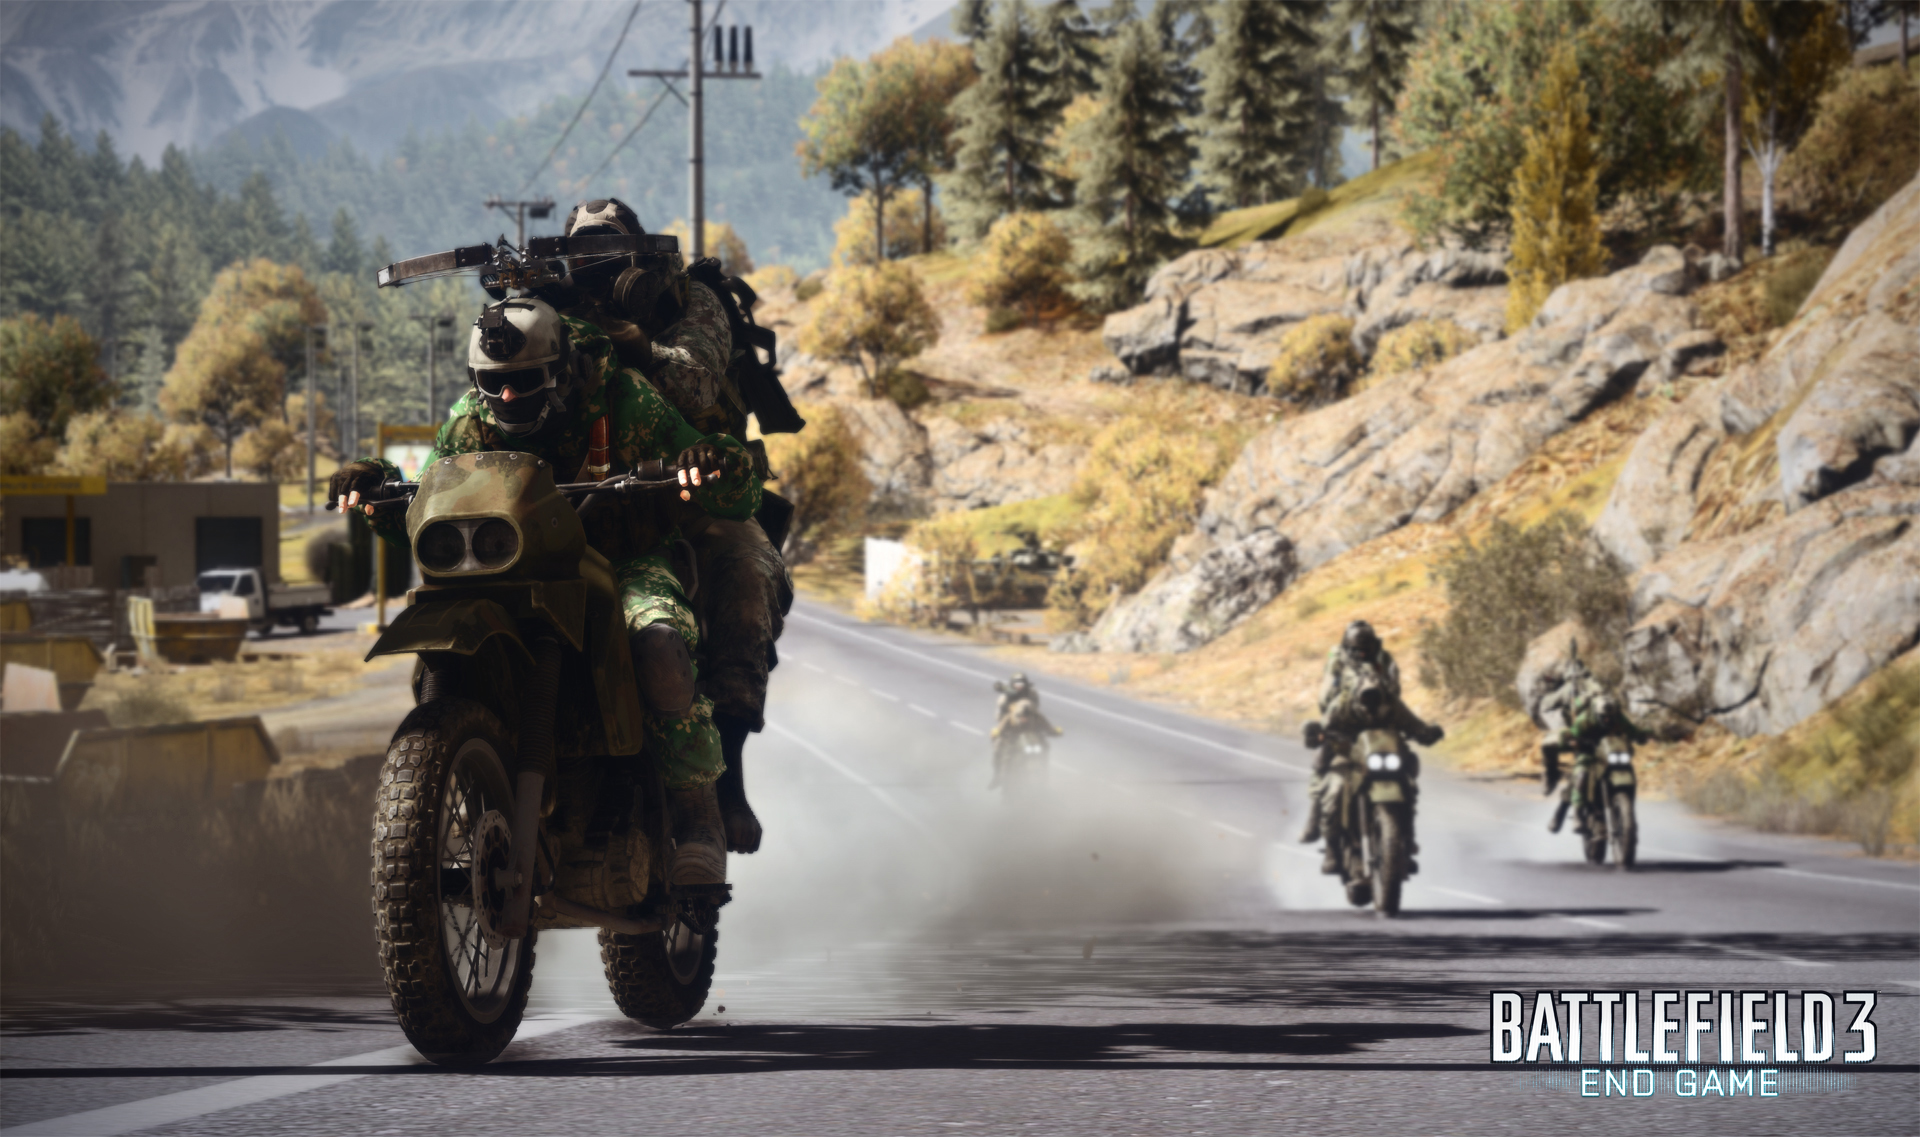 Media asset in full size related to 3dfxzone.it news item entitled as follows: DICE pubblica screenshots e video del DLC Battlefield 3: End Game | Image Name: news18928_Battlefield-3-End-Game_1.jpg